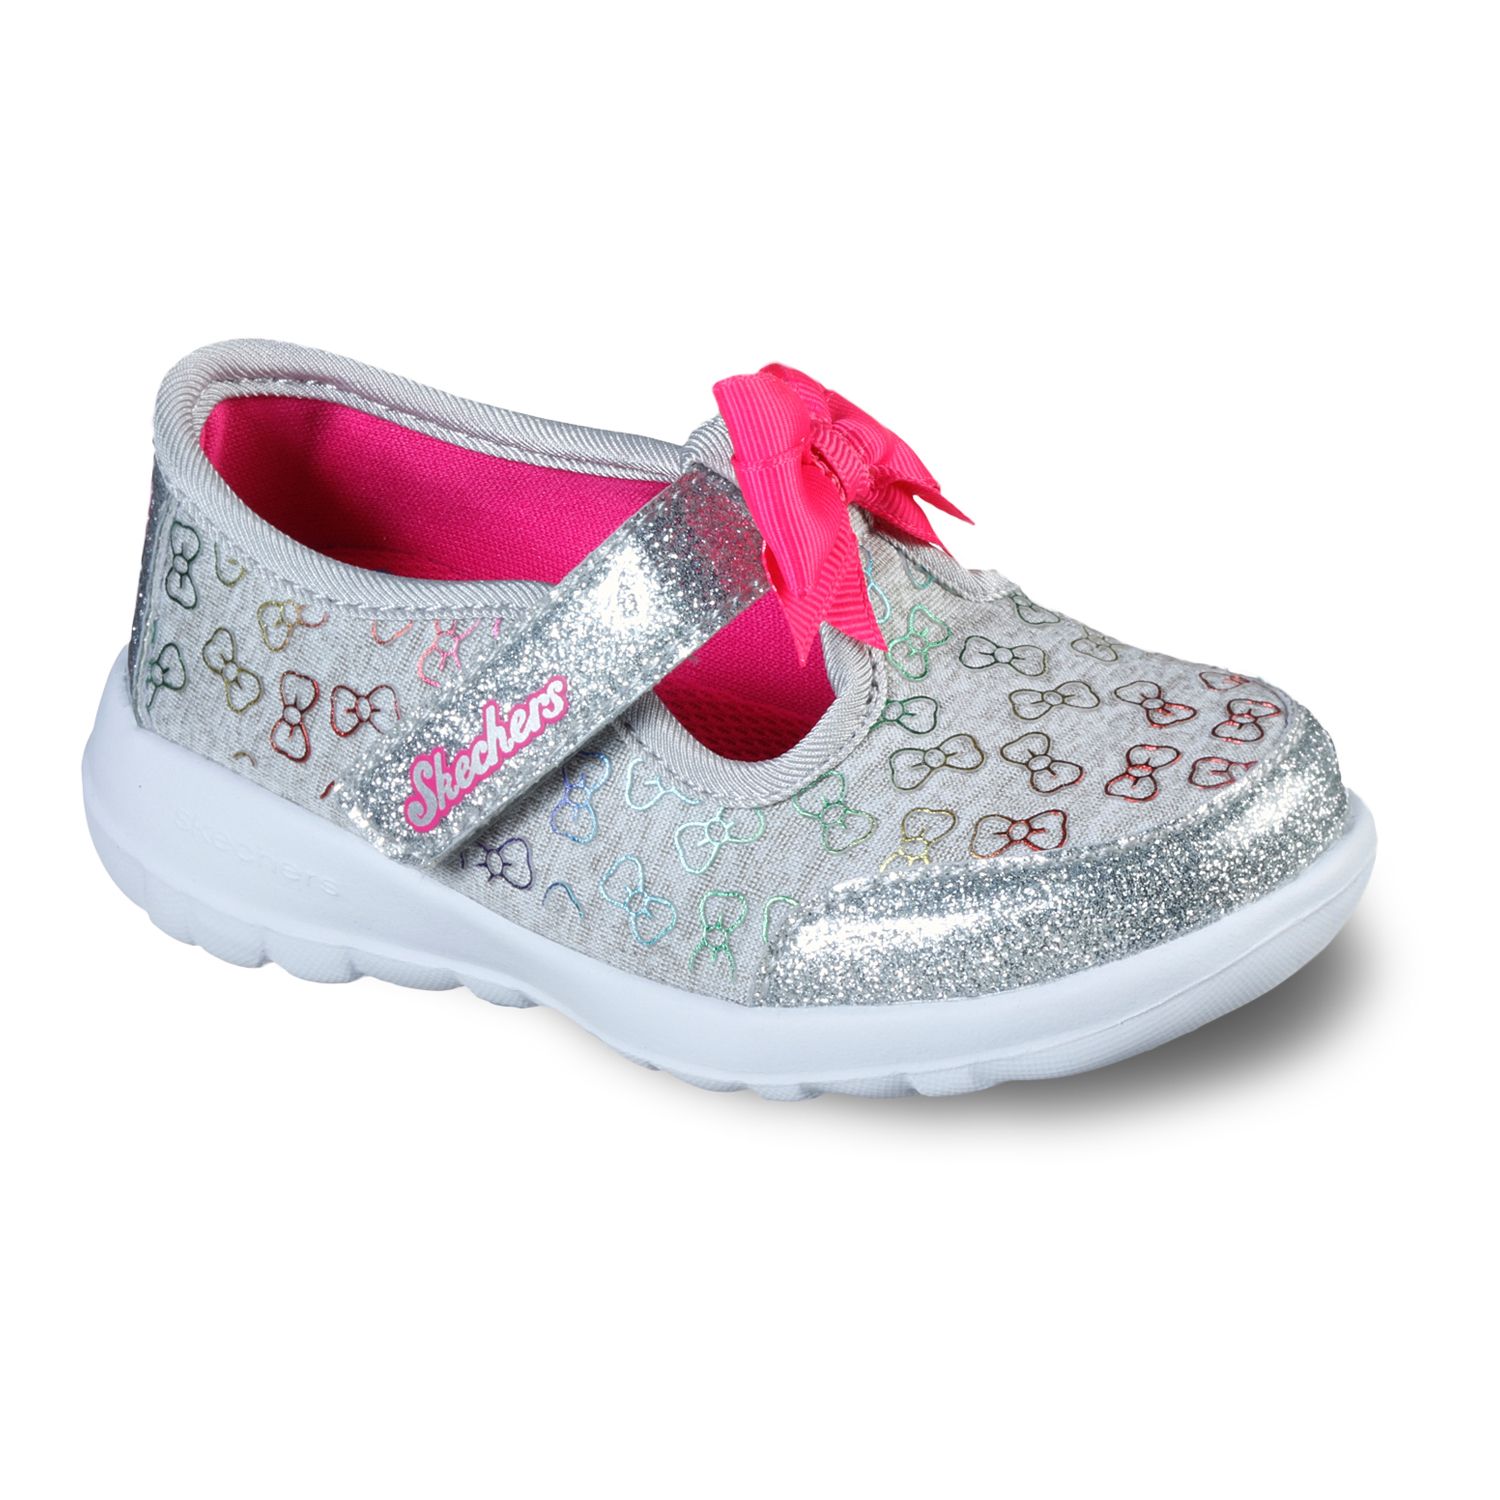 skechers baby shoes size 3